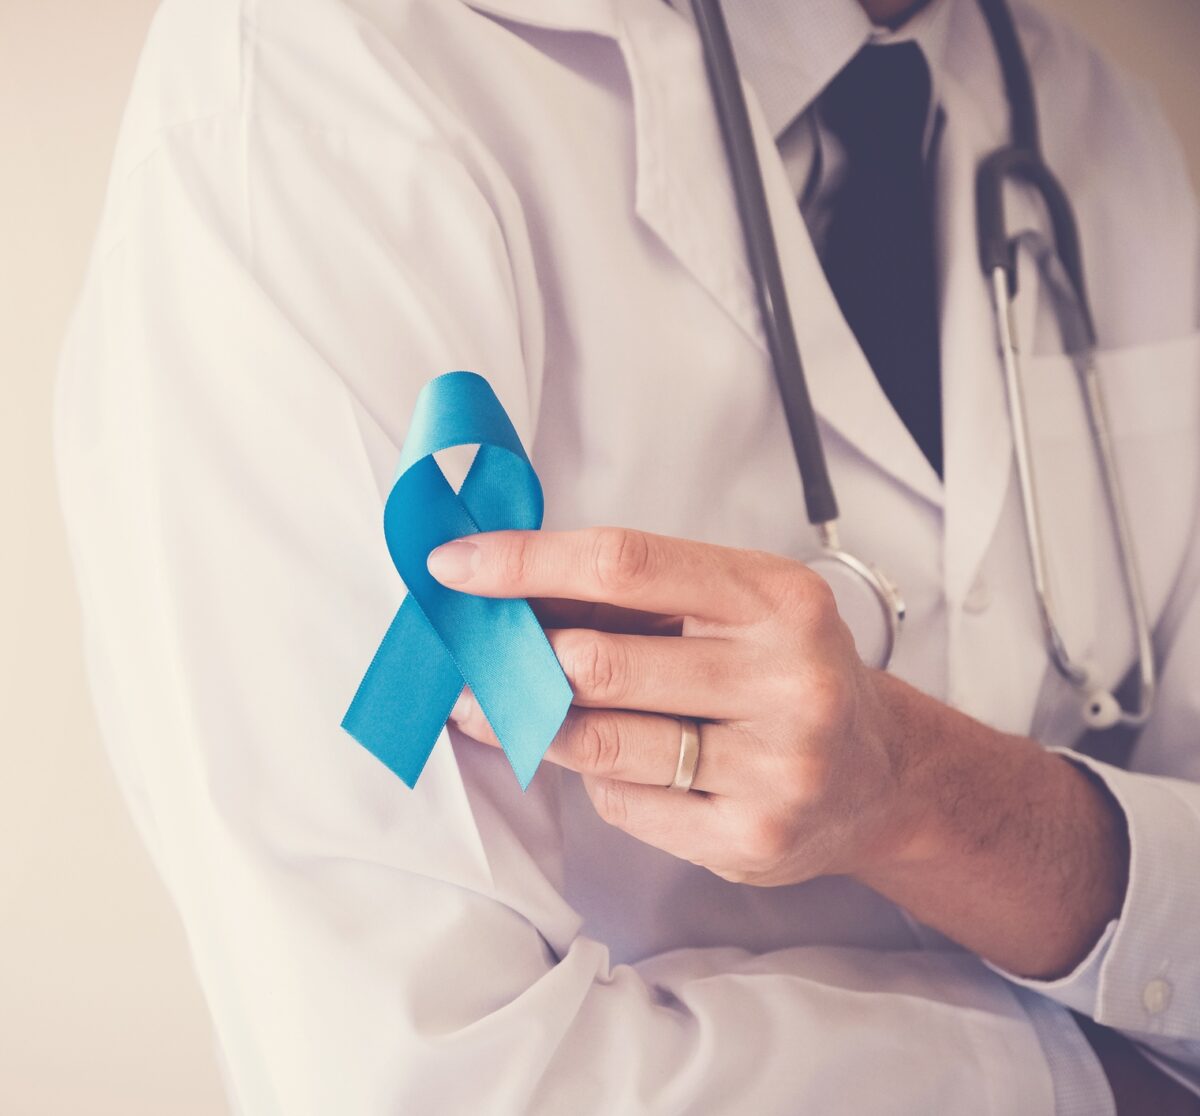 Prostate Cancer: Early Detection